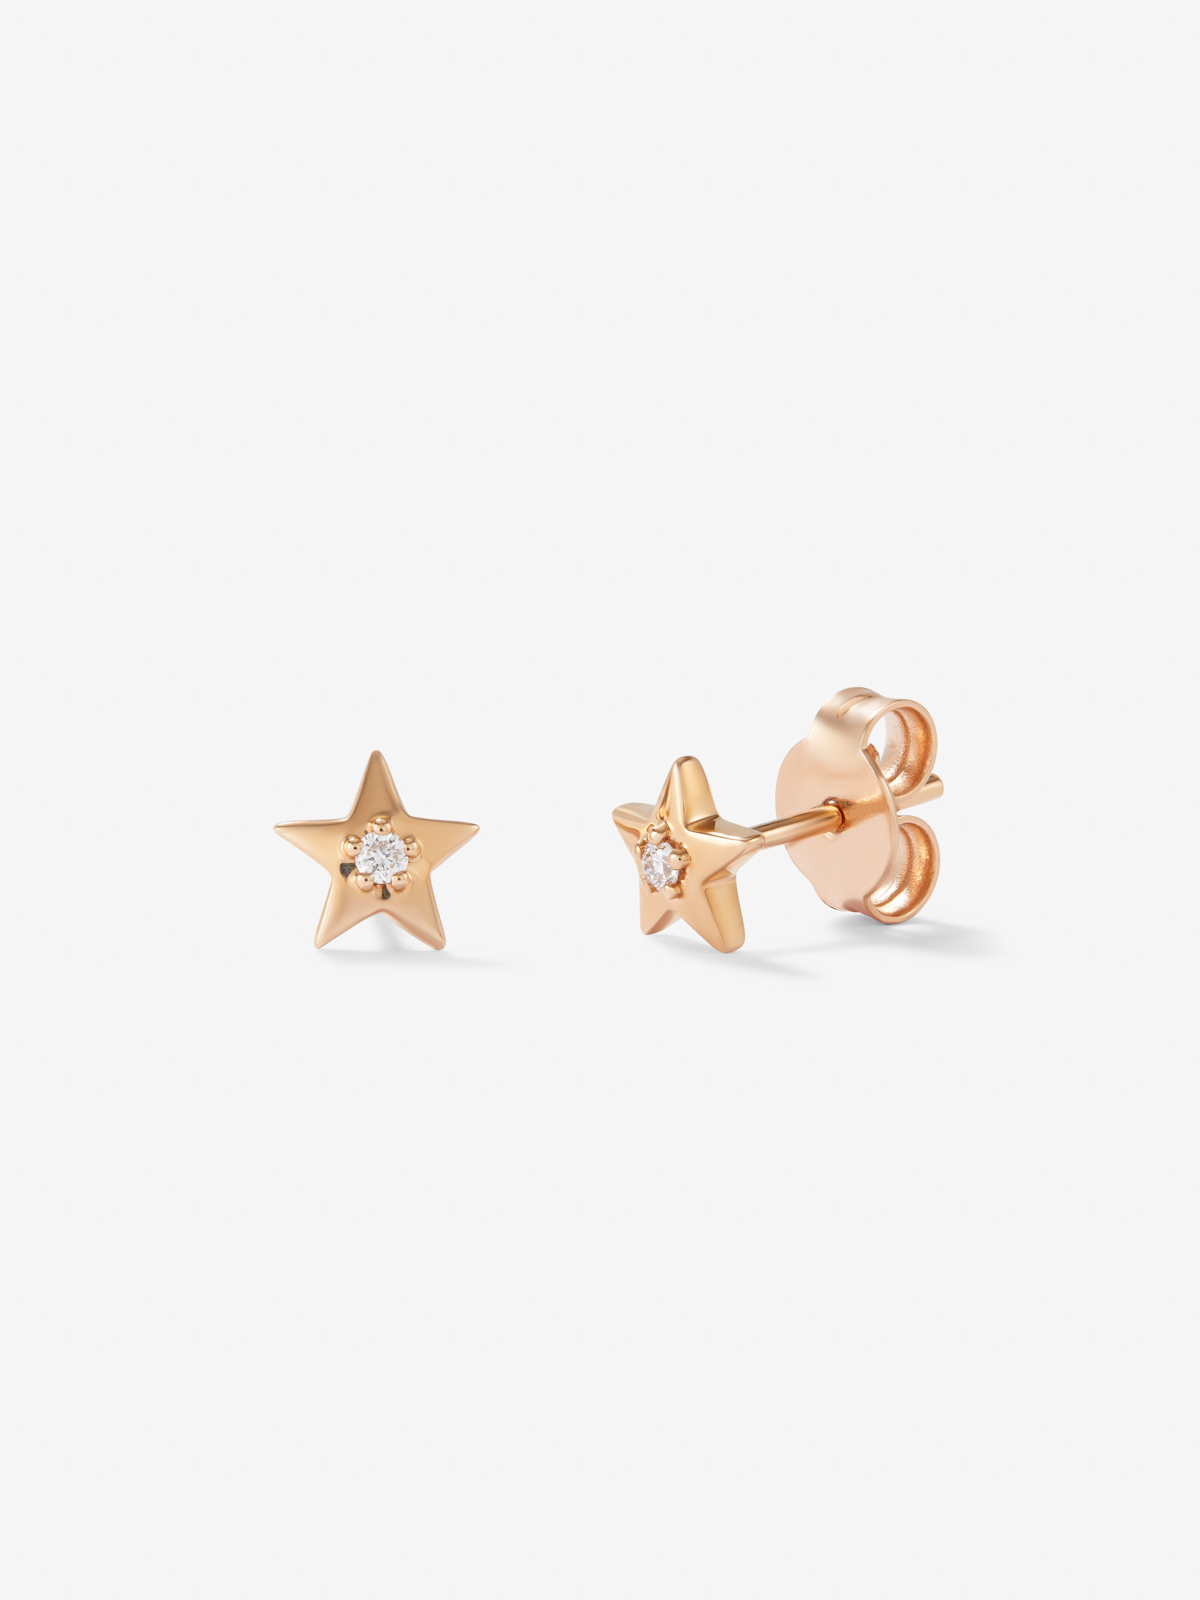 18kt rose gold earrings with diamonds